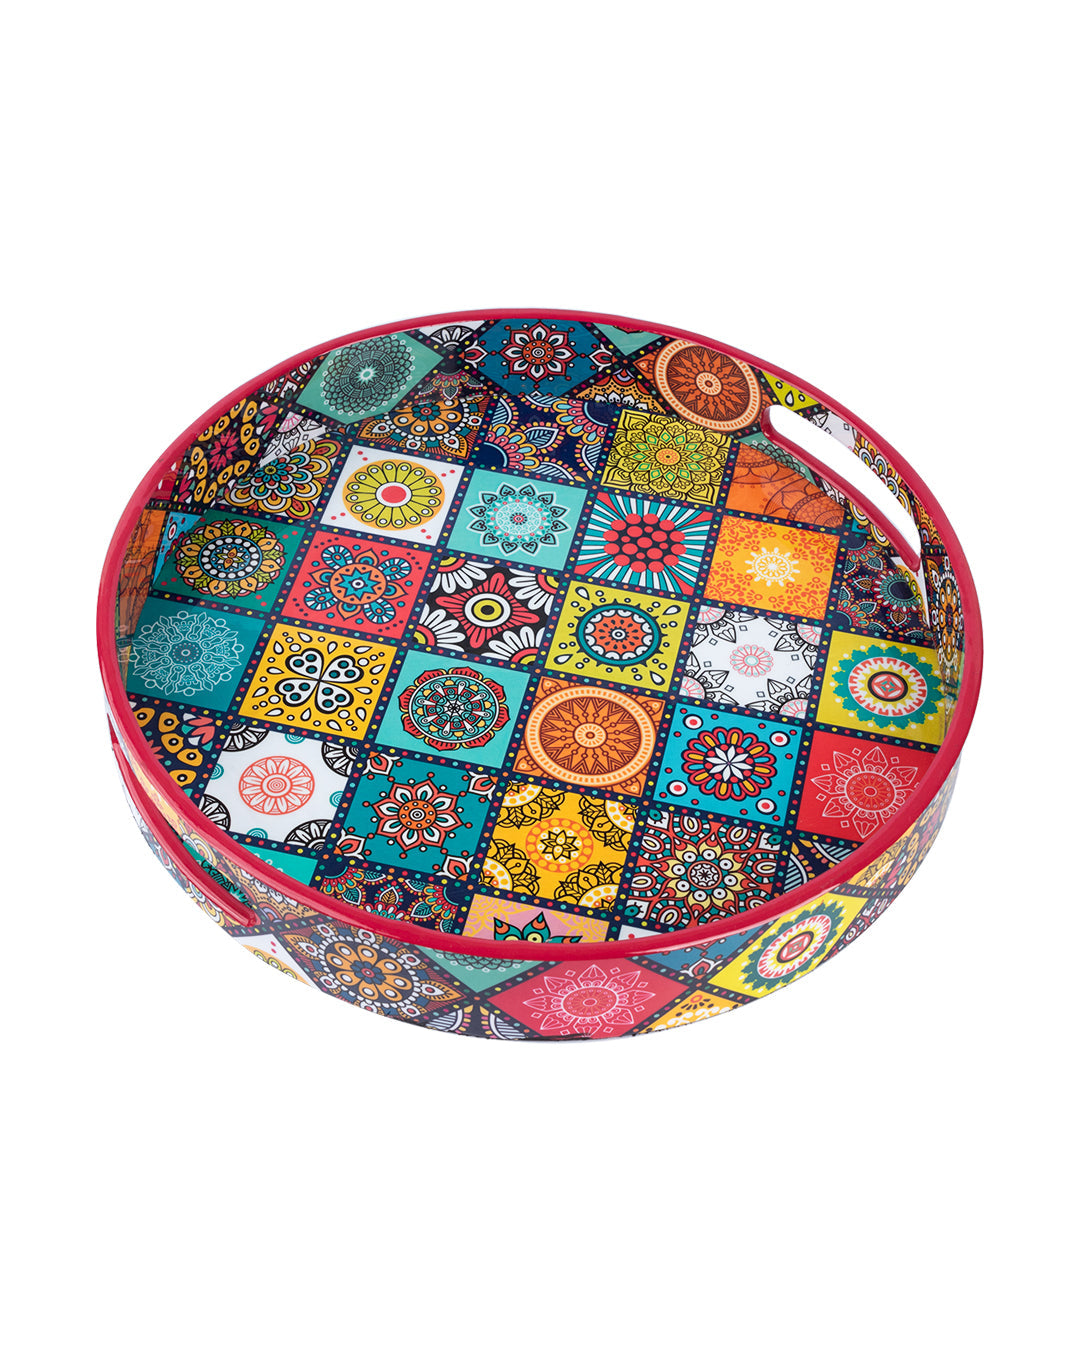 VON CASA Tray with Handle, Round, Multiple Style Print, Multicolour, MDF